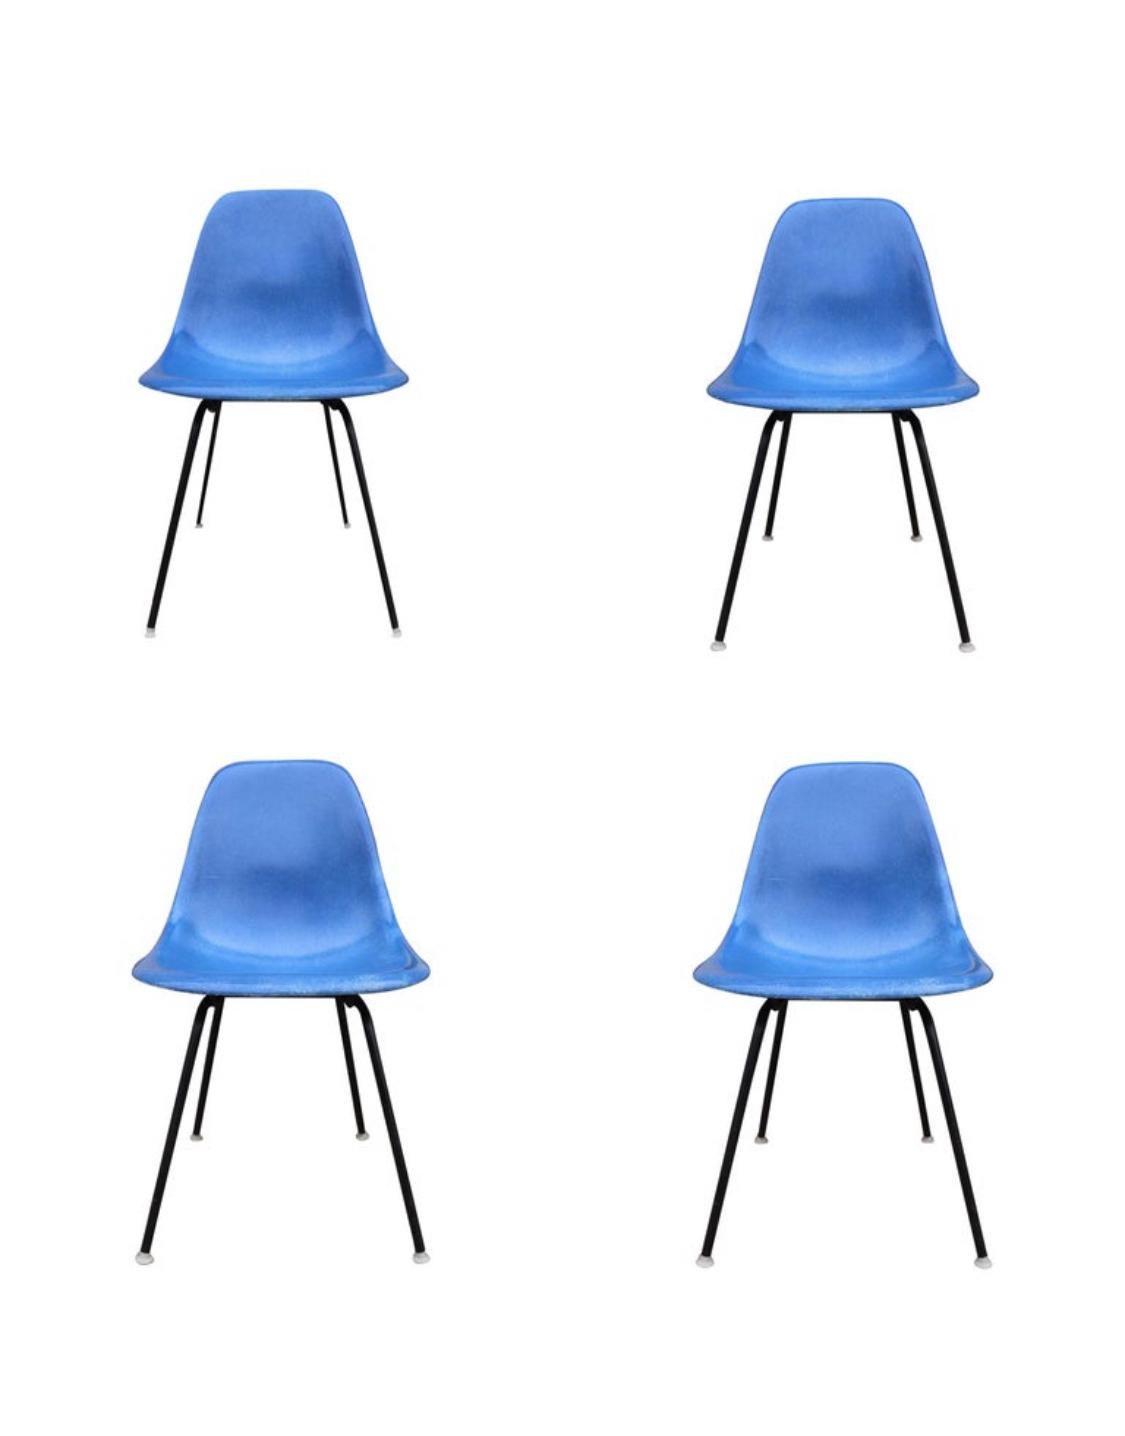 Set of 8 Herman Miller Eames fiberglass dining chairs. Authentic vintage tops and bases. In good vintage condition with normal wear. All new shock mounts installed at $1000 value. Bases available in metallic or black (as shown in photos). All chairs